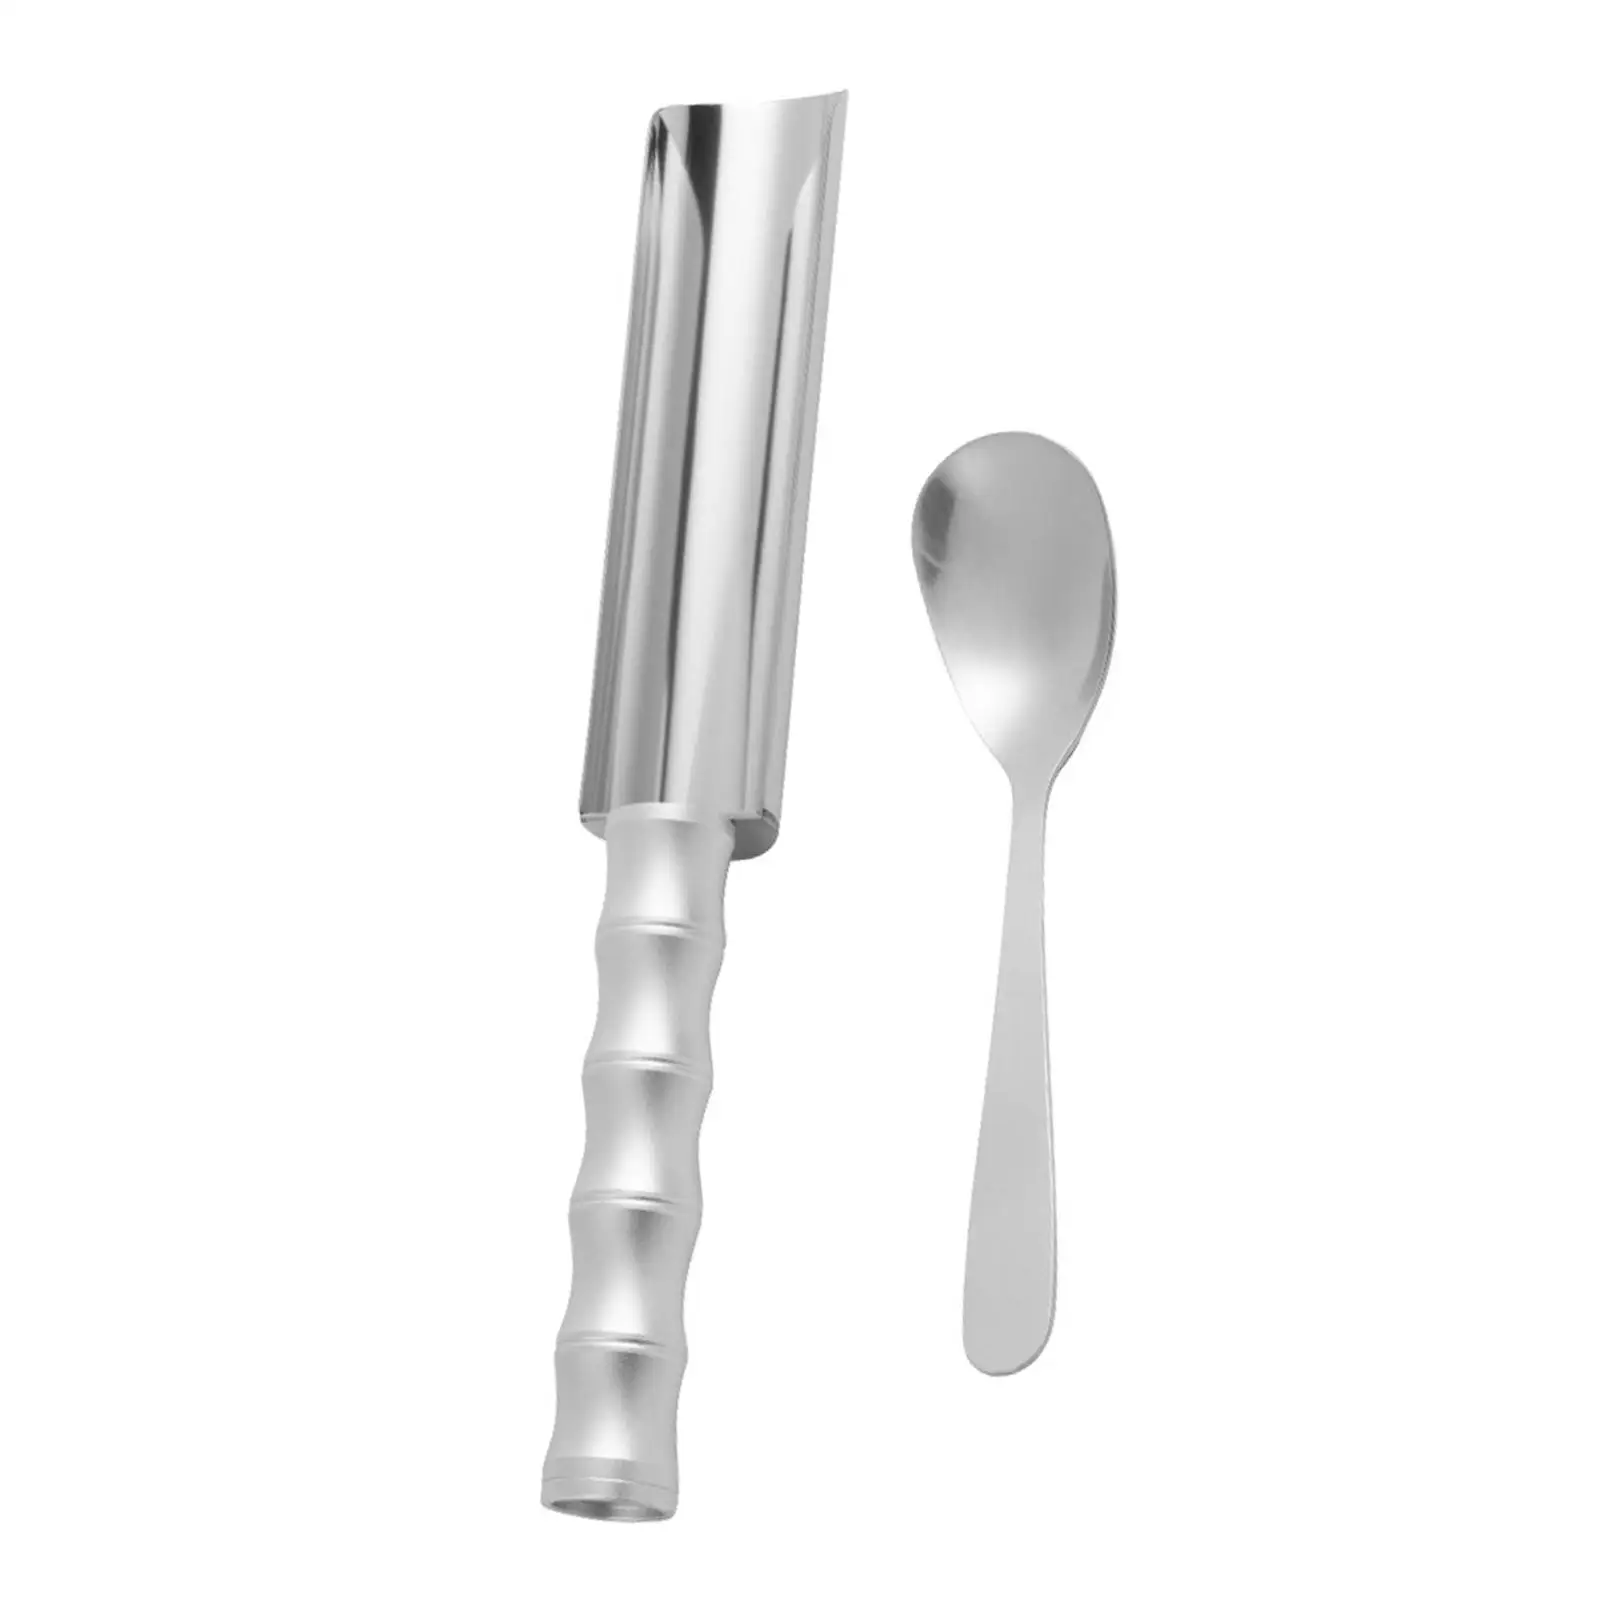 DIY Meatball Making Comfortable Grip Meatball Shaper Kitchen Meatball Maker Meat Baller Spoon with Spade for Beef Meat Ball